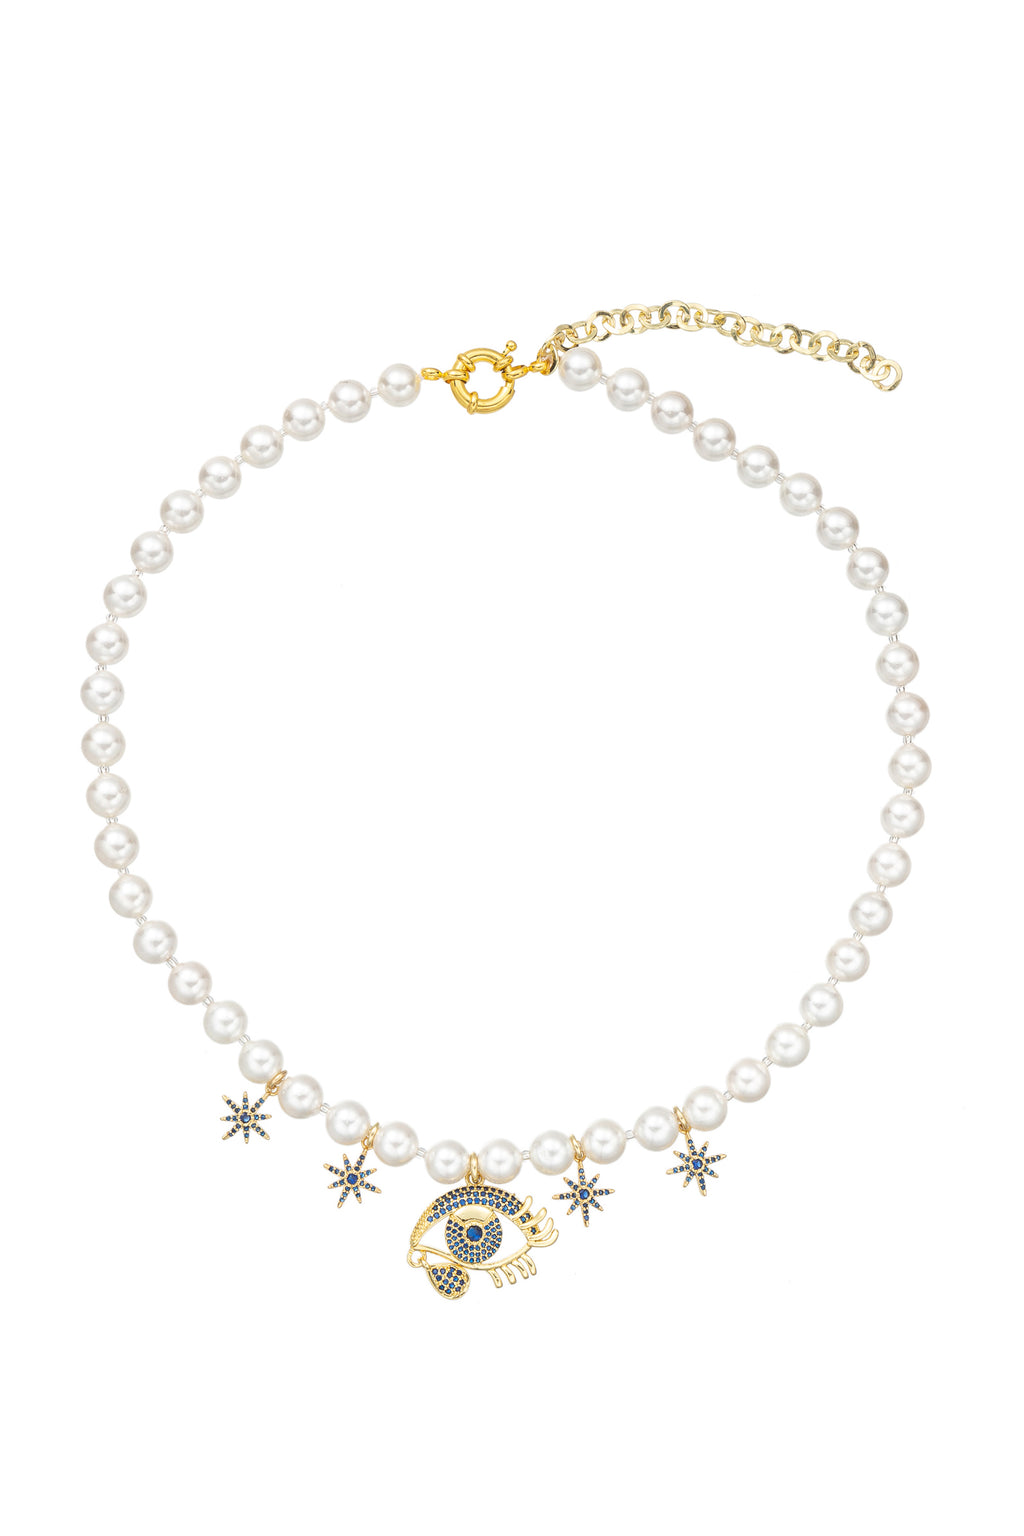 Teardrop eye pendant necklace studded with CZ crystals on a shell pearl band.